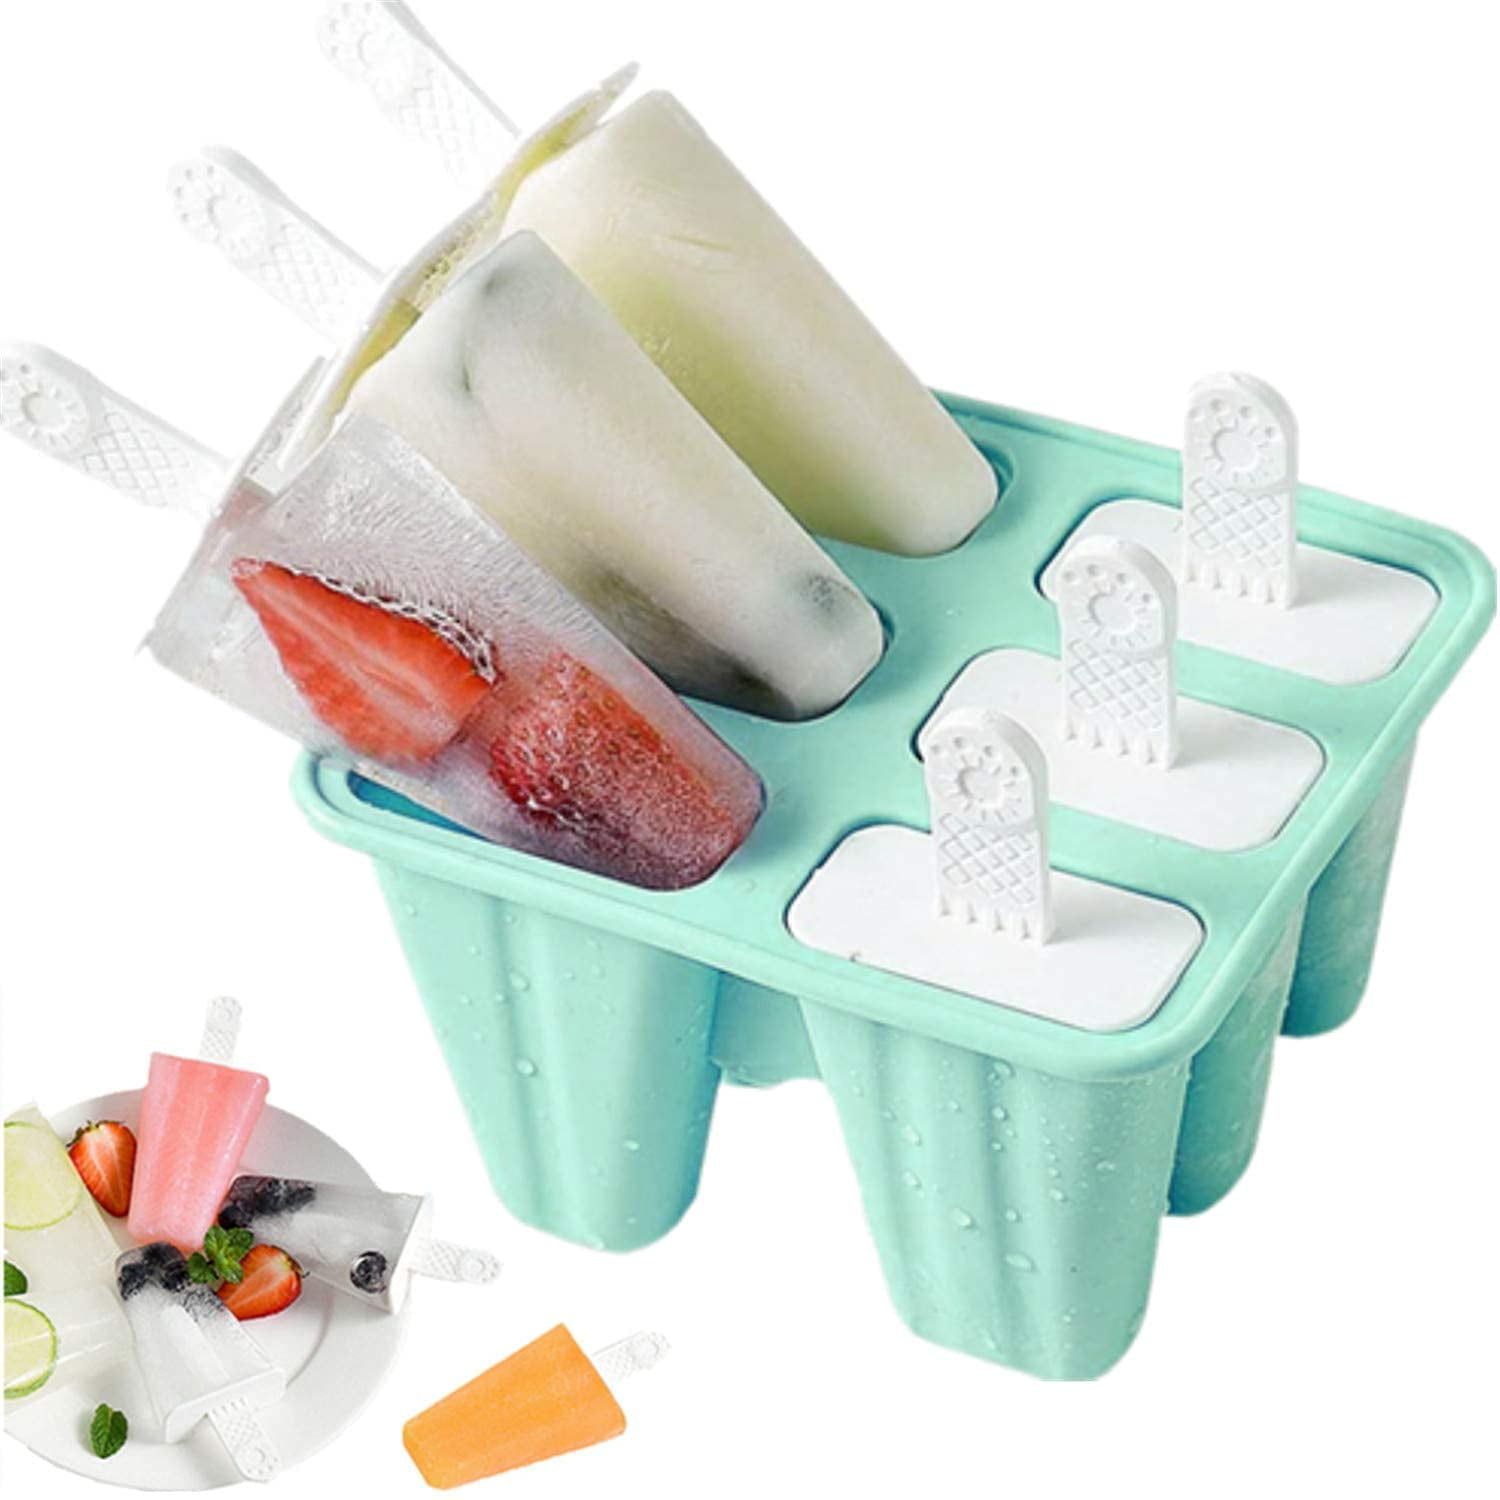 Silicone Ice Cream Mold Reusable Popsicle Molds Diy Homemade Cute Cartoon Ice  Cream Popsicle Ice Pop Maker Mould Ns2